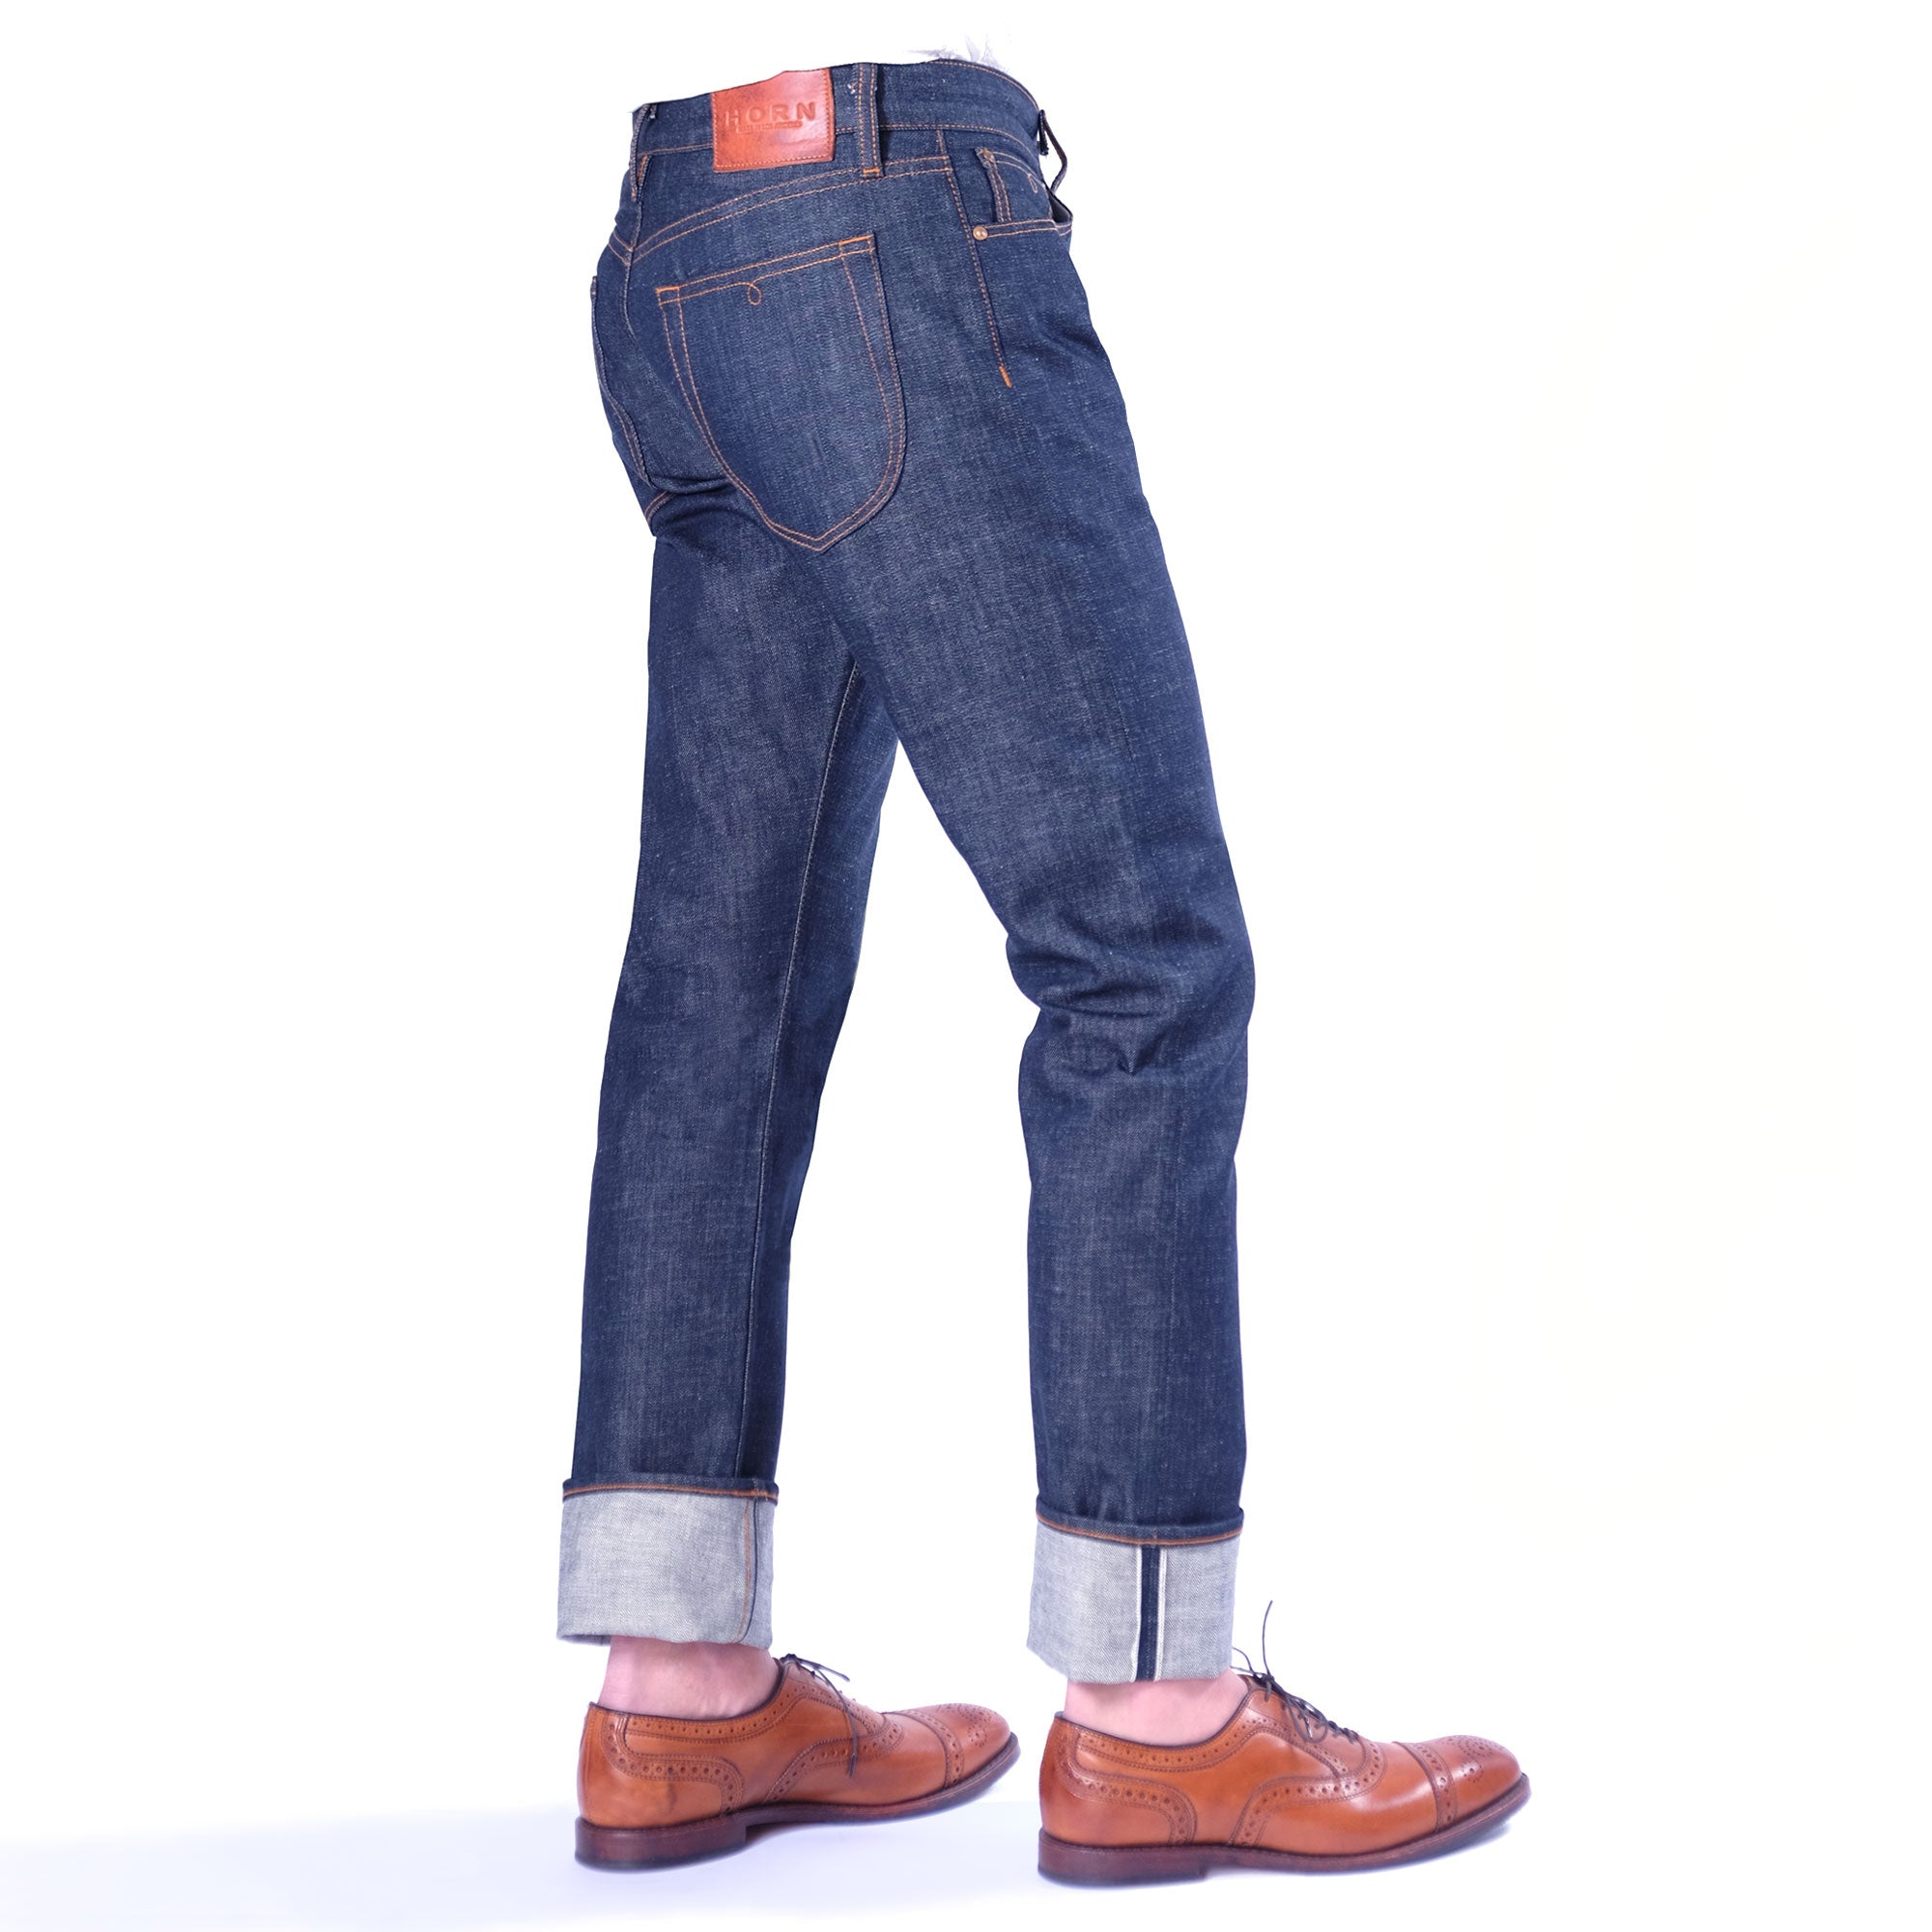 Horn_Dude_Raw_Selvage_Denim_Jean_ Side